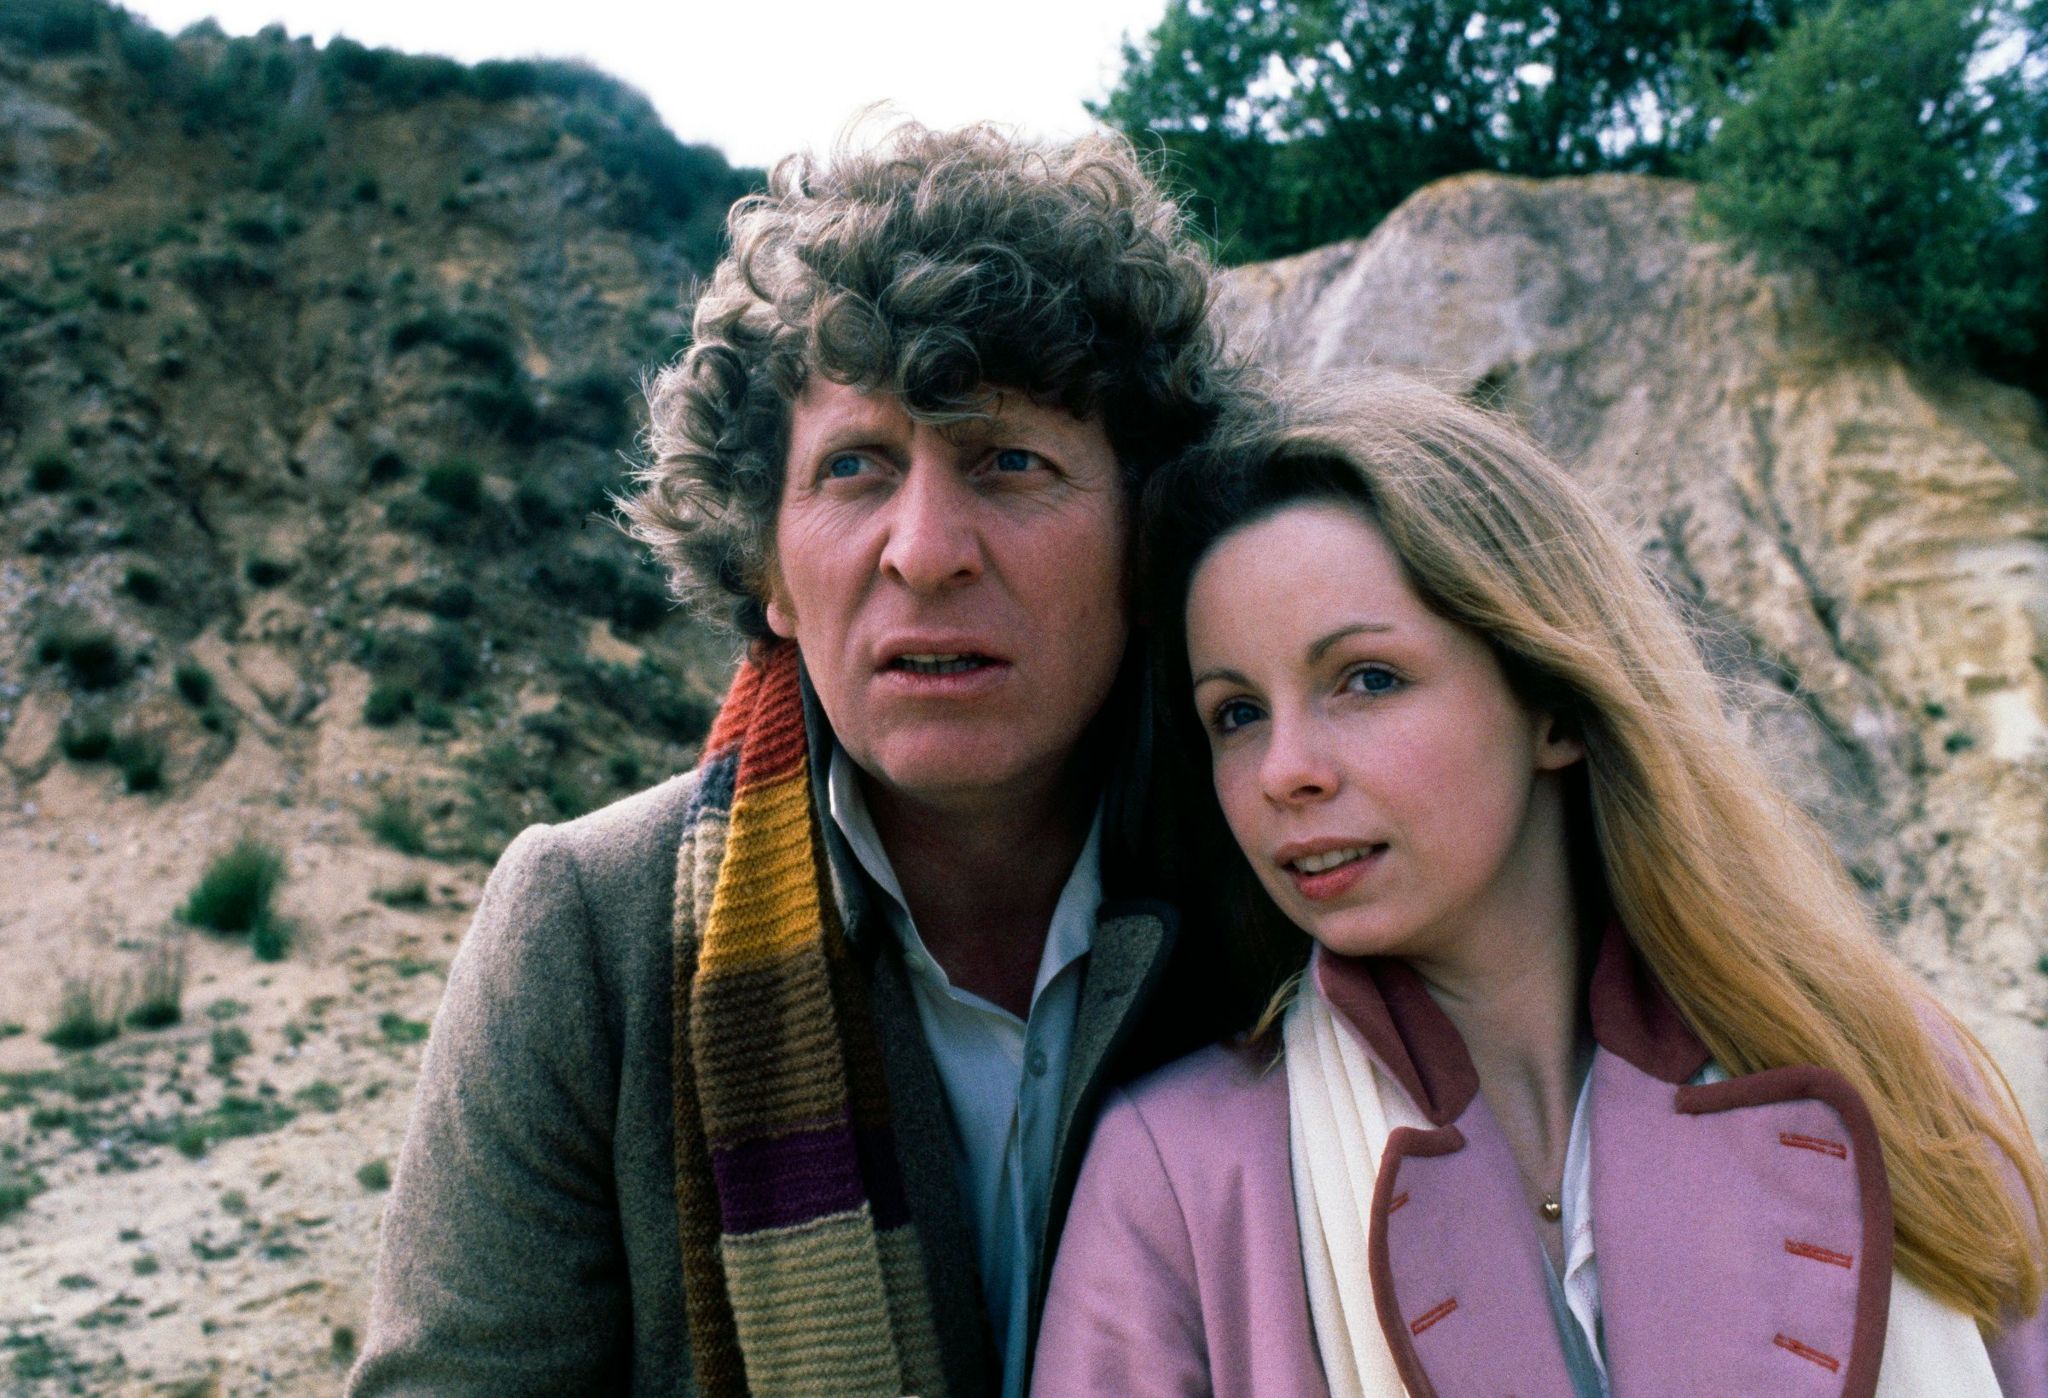 Tom Baker (The Doctor) and Lalla Ward (Romana) on the planet Skaro in Destiny of the Daleks (1979)